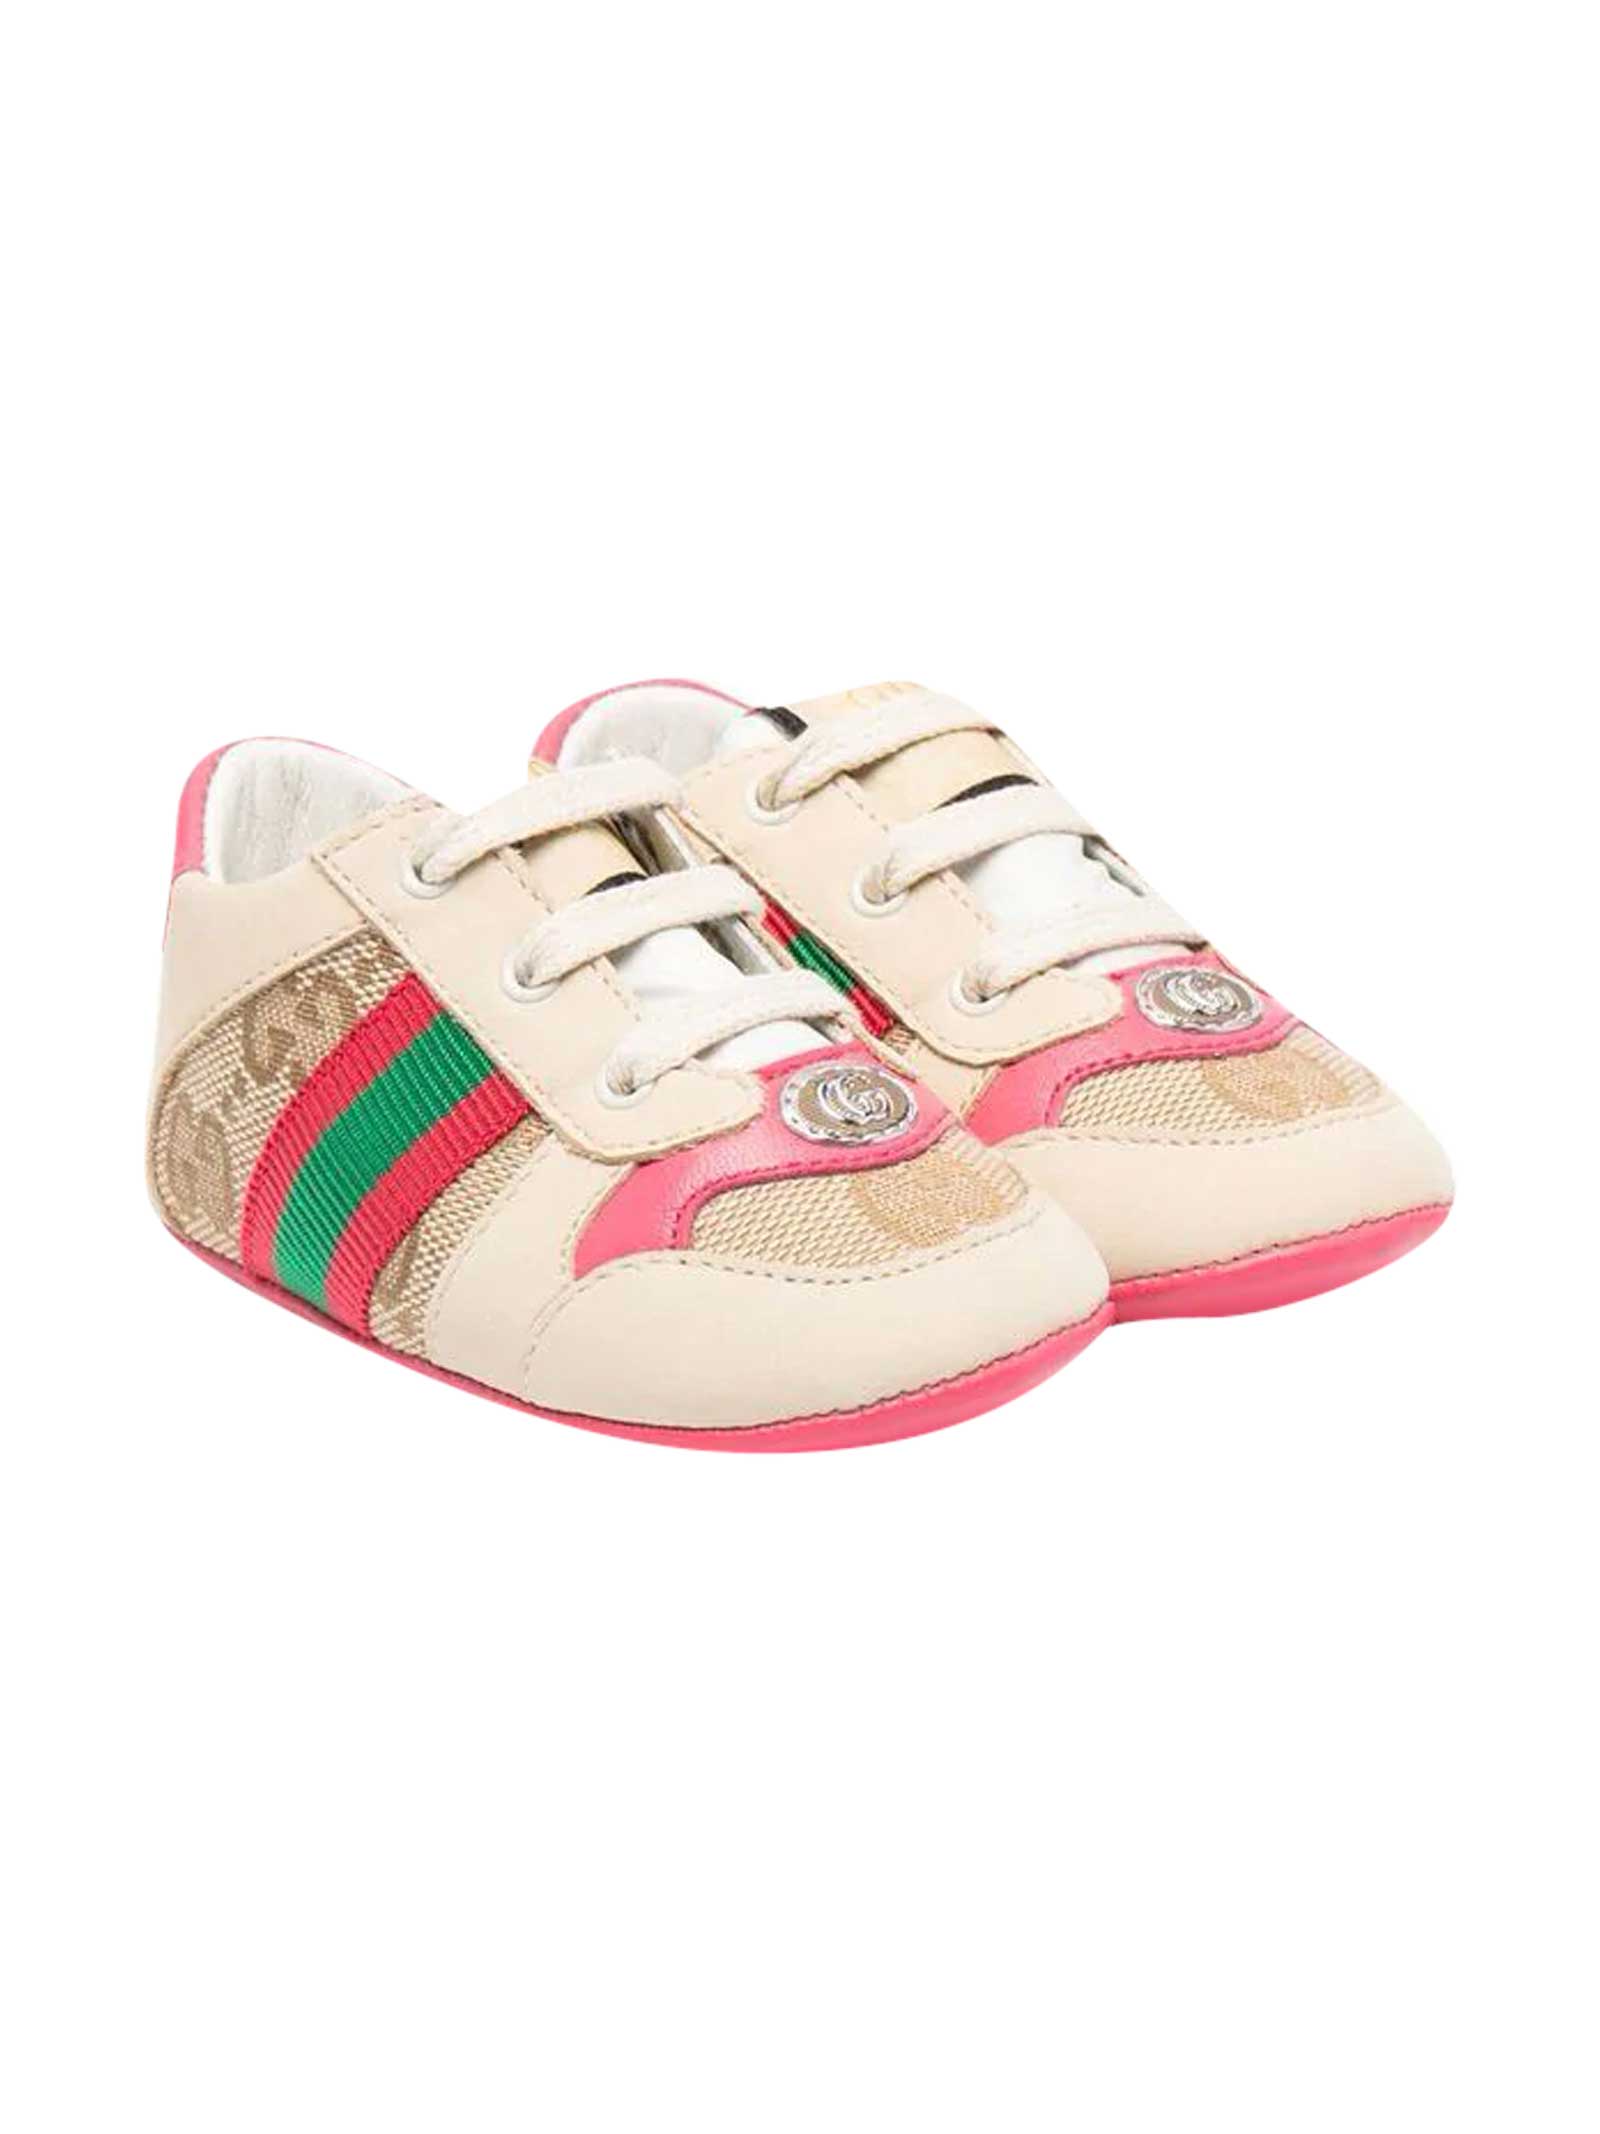 pink gucci baby shoes